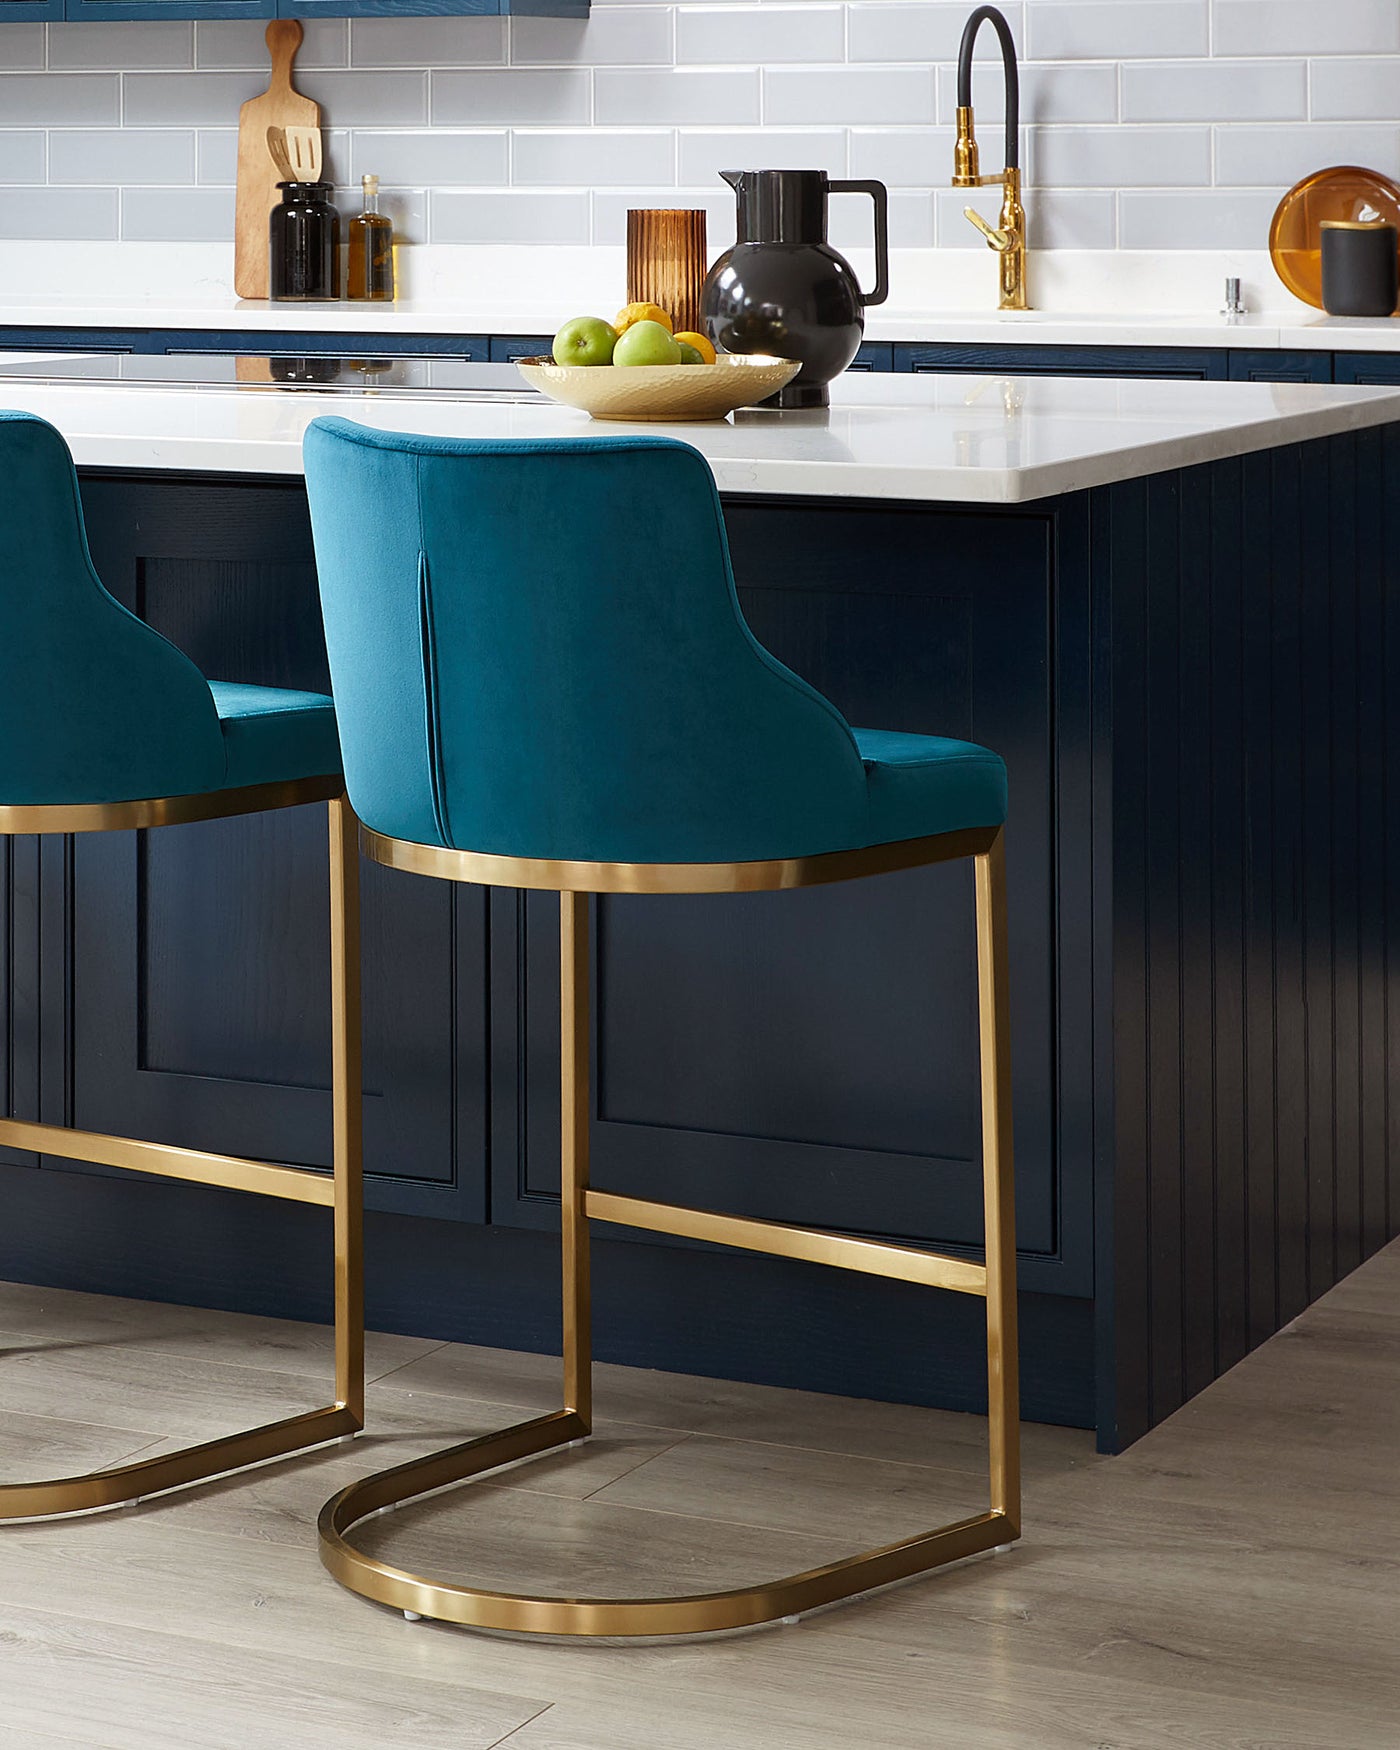 Elegant modern bar stools with plush teal upholstery and sleek gold-finished metal frames, showcased in a stylish kitchen with a navy blue island counter.